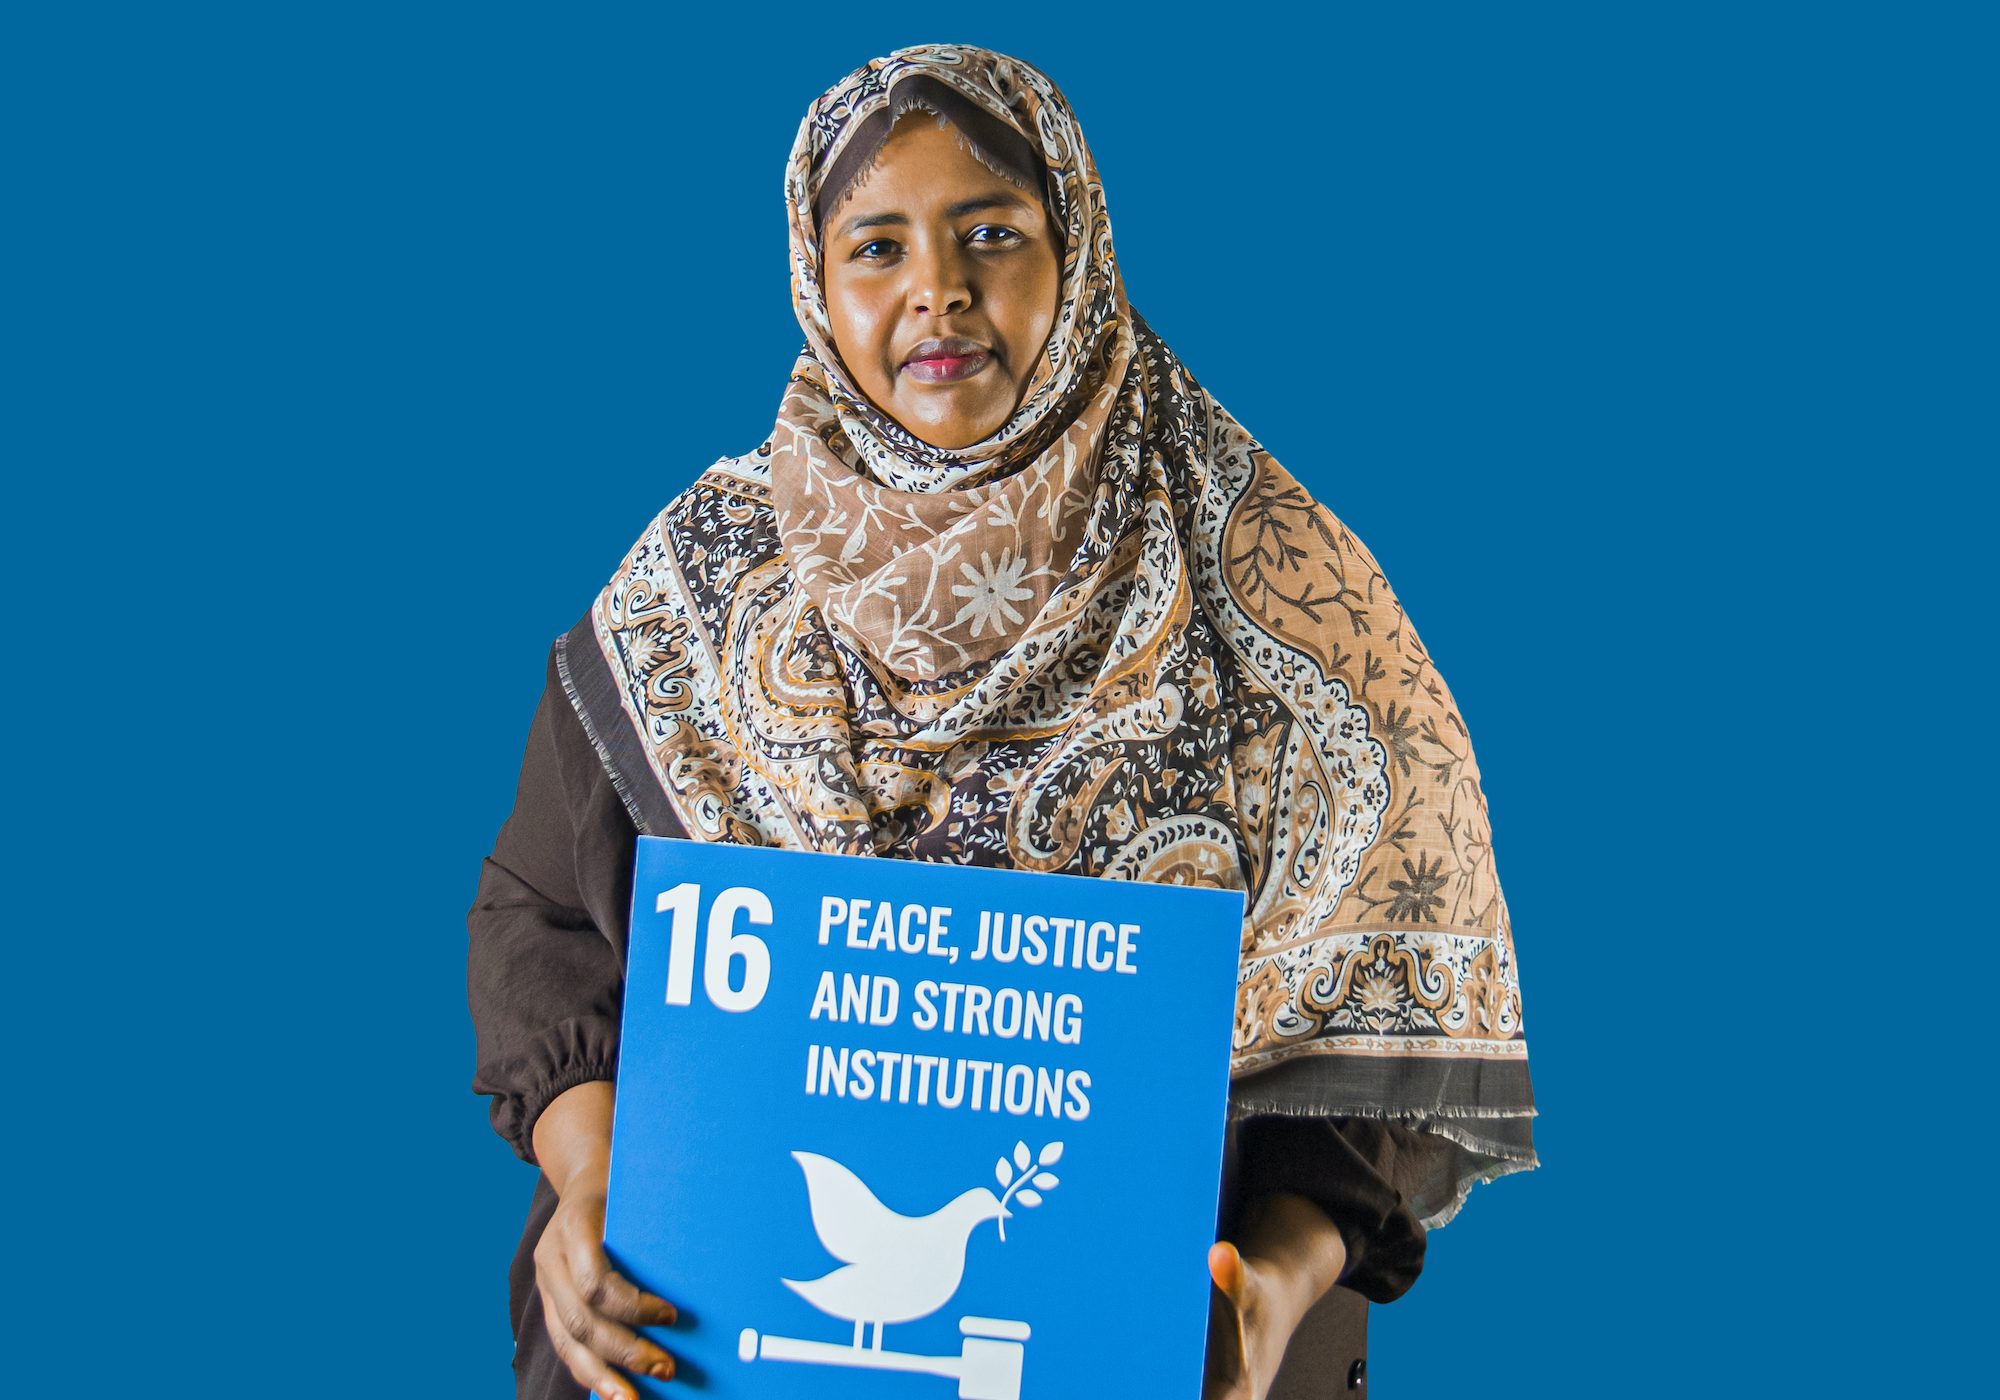 Woman holding up sign showing Global Sustainable Development Goal 16, peace, justice and strong institutions.